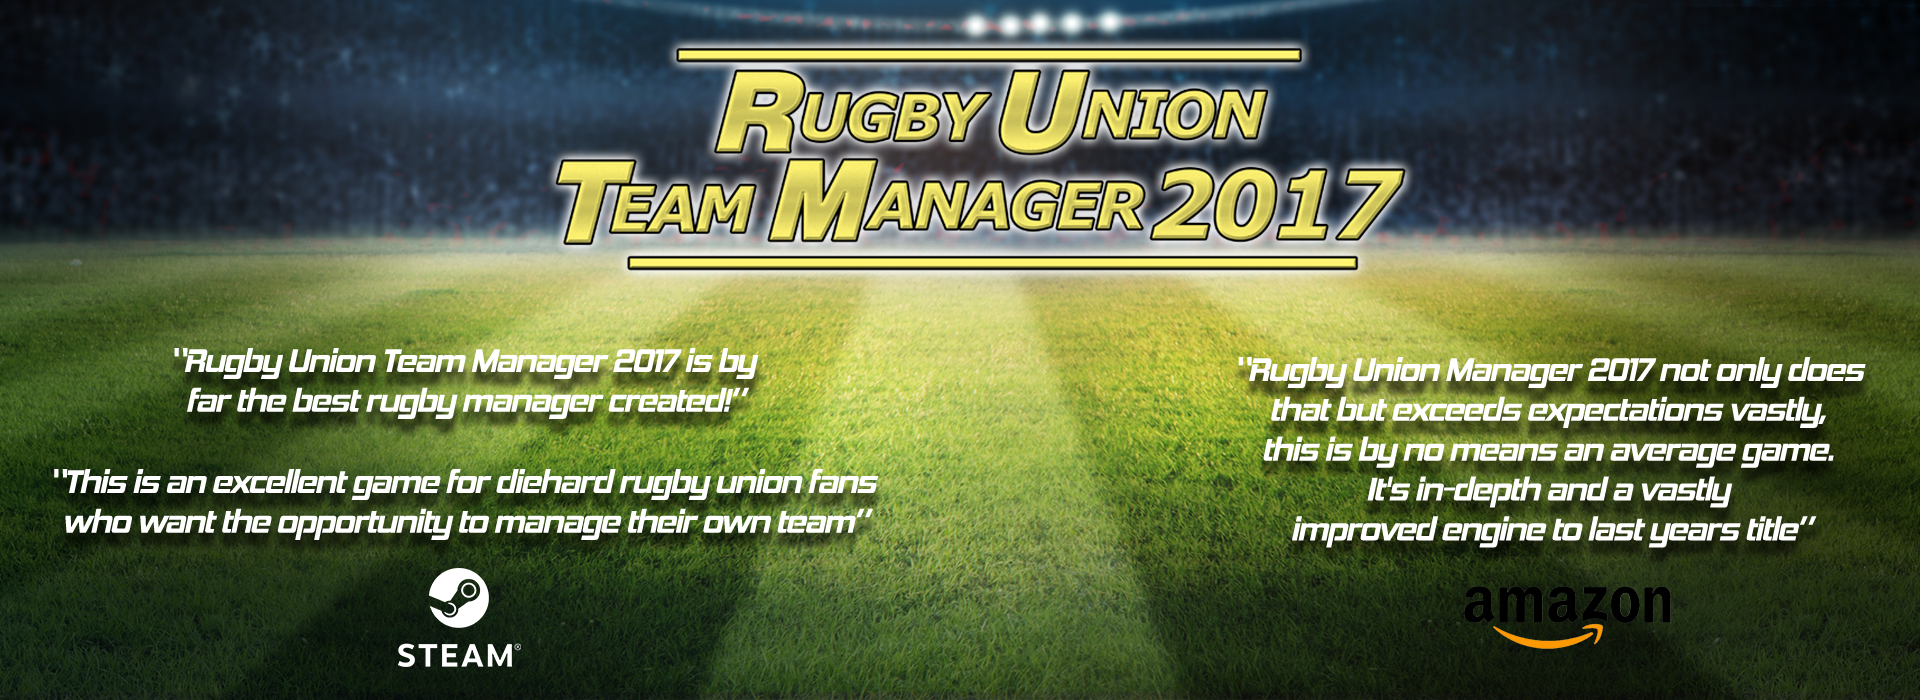 Rugby Union Team Manager 17 Reviews